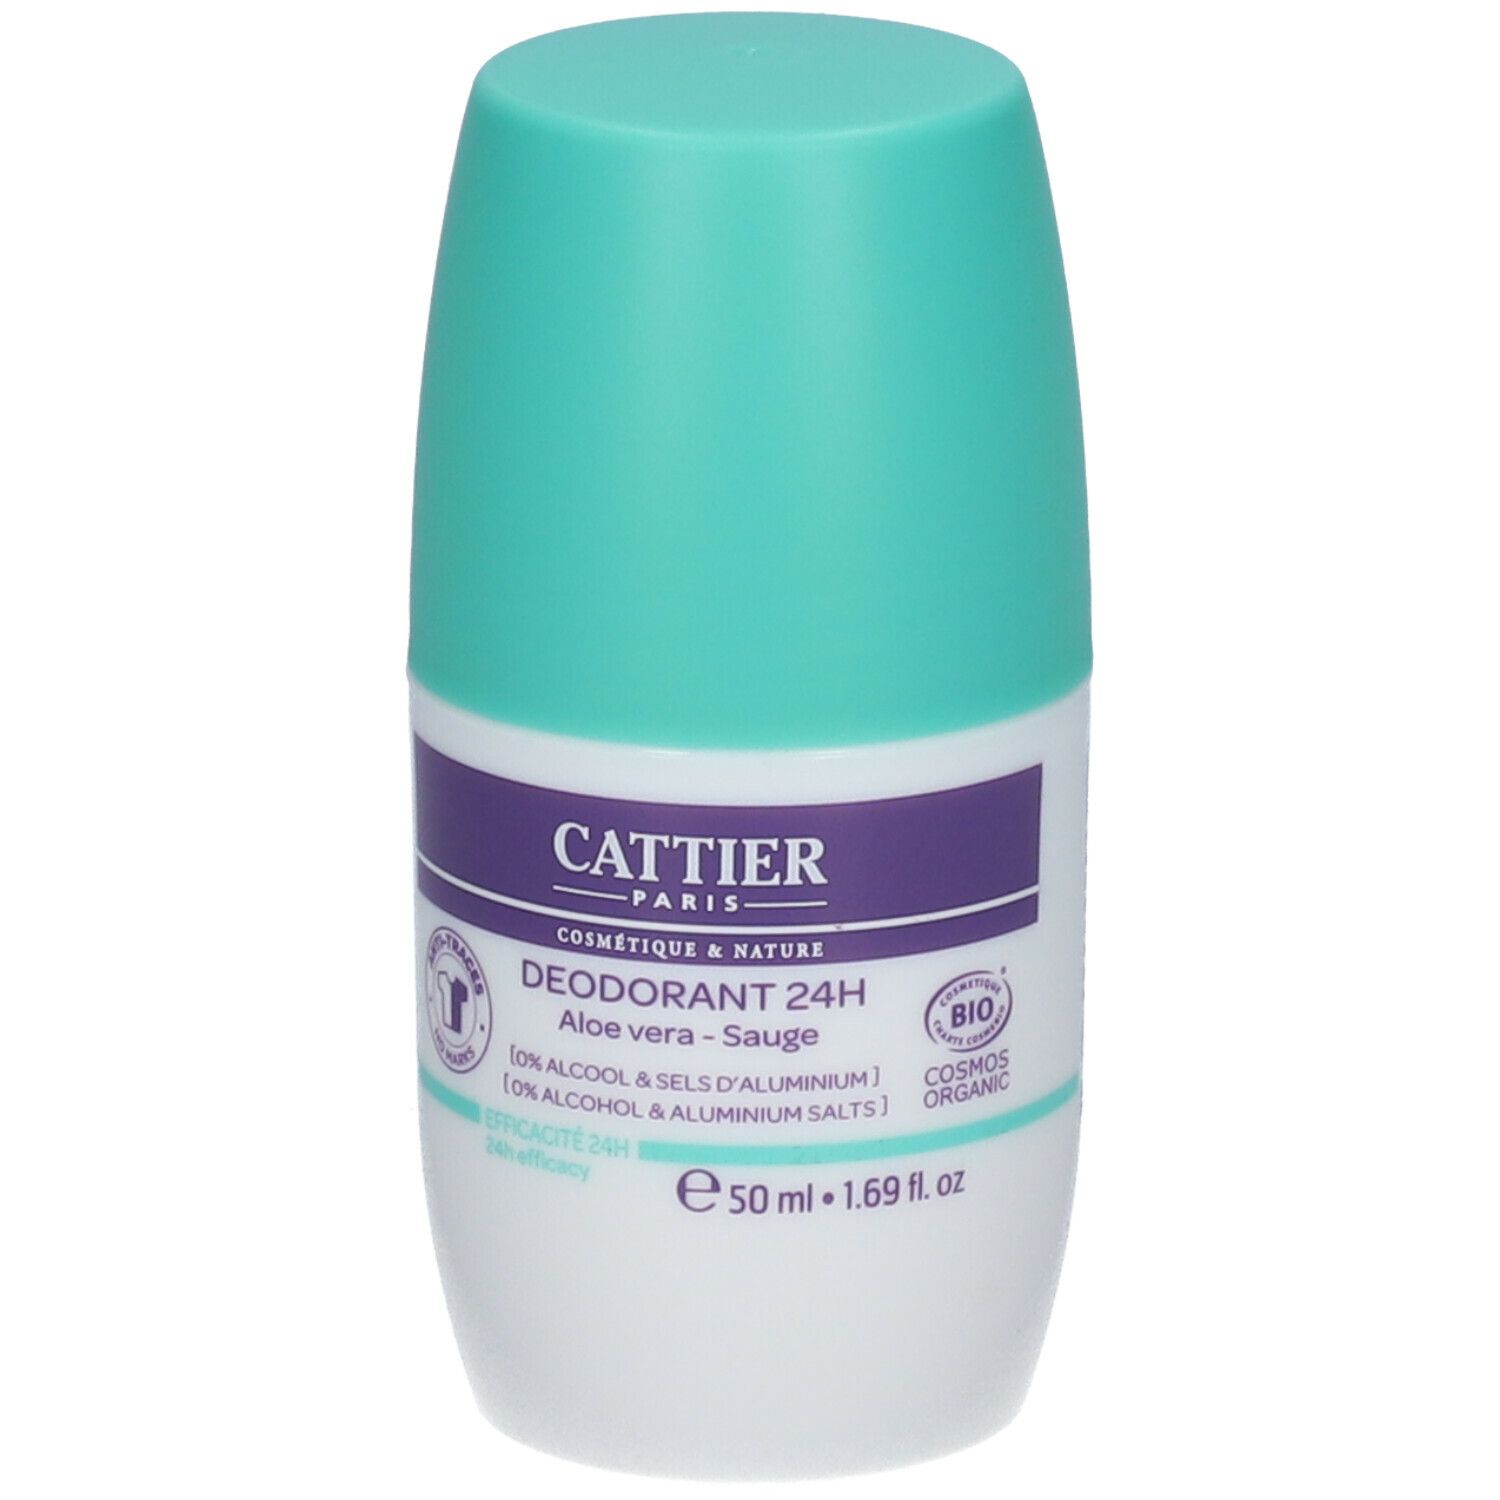 Image of CATTIER Deodorant 24h Roll-On